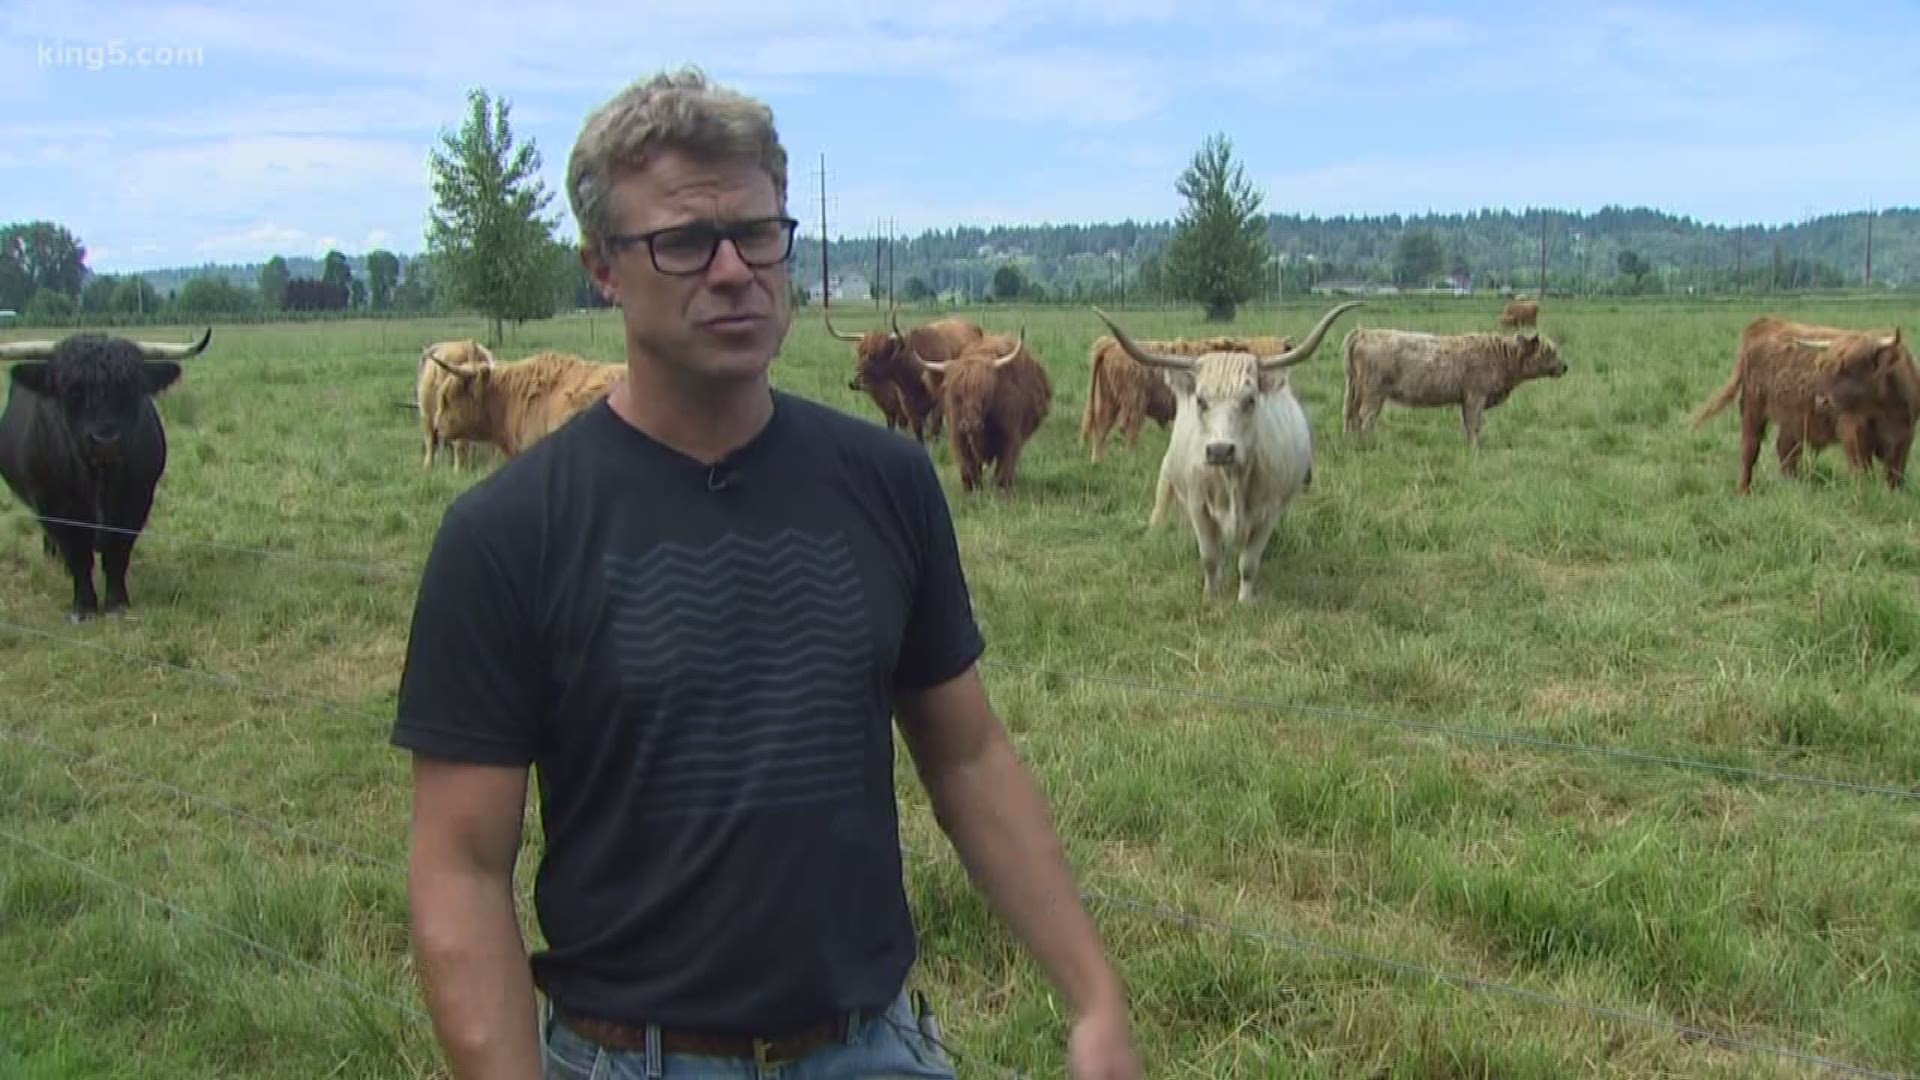 A new form of farming is coming to Snohomish County. "Agro-forestry" combines agriculture and forestry to return farmlands to a more natural state. As KING 5's Eric Wilkinson reports, it's also creating a cleaner environment.